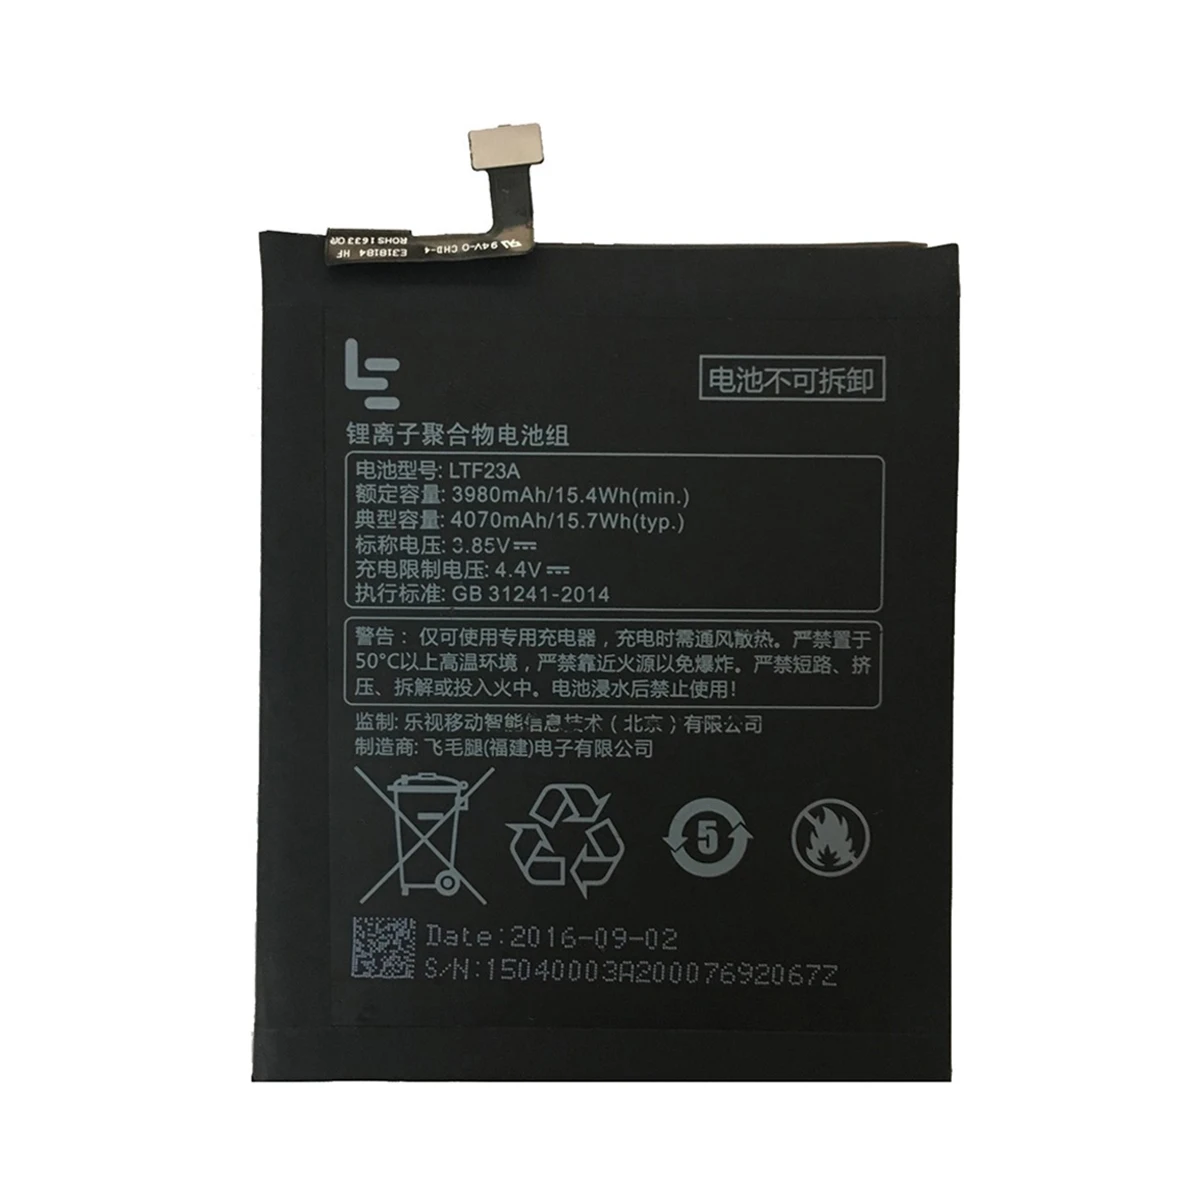 100% original Good quality Real LTF23A 4070mAh Battery For Letv LeEco Le Pro 3 X720 X722 X728 Battery Replacement best mobile charger Phone Batteries